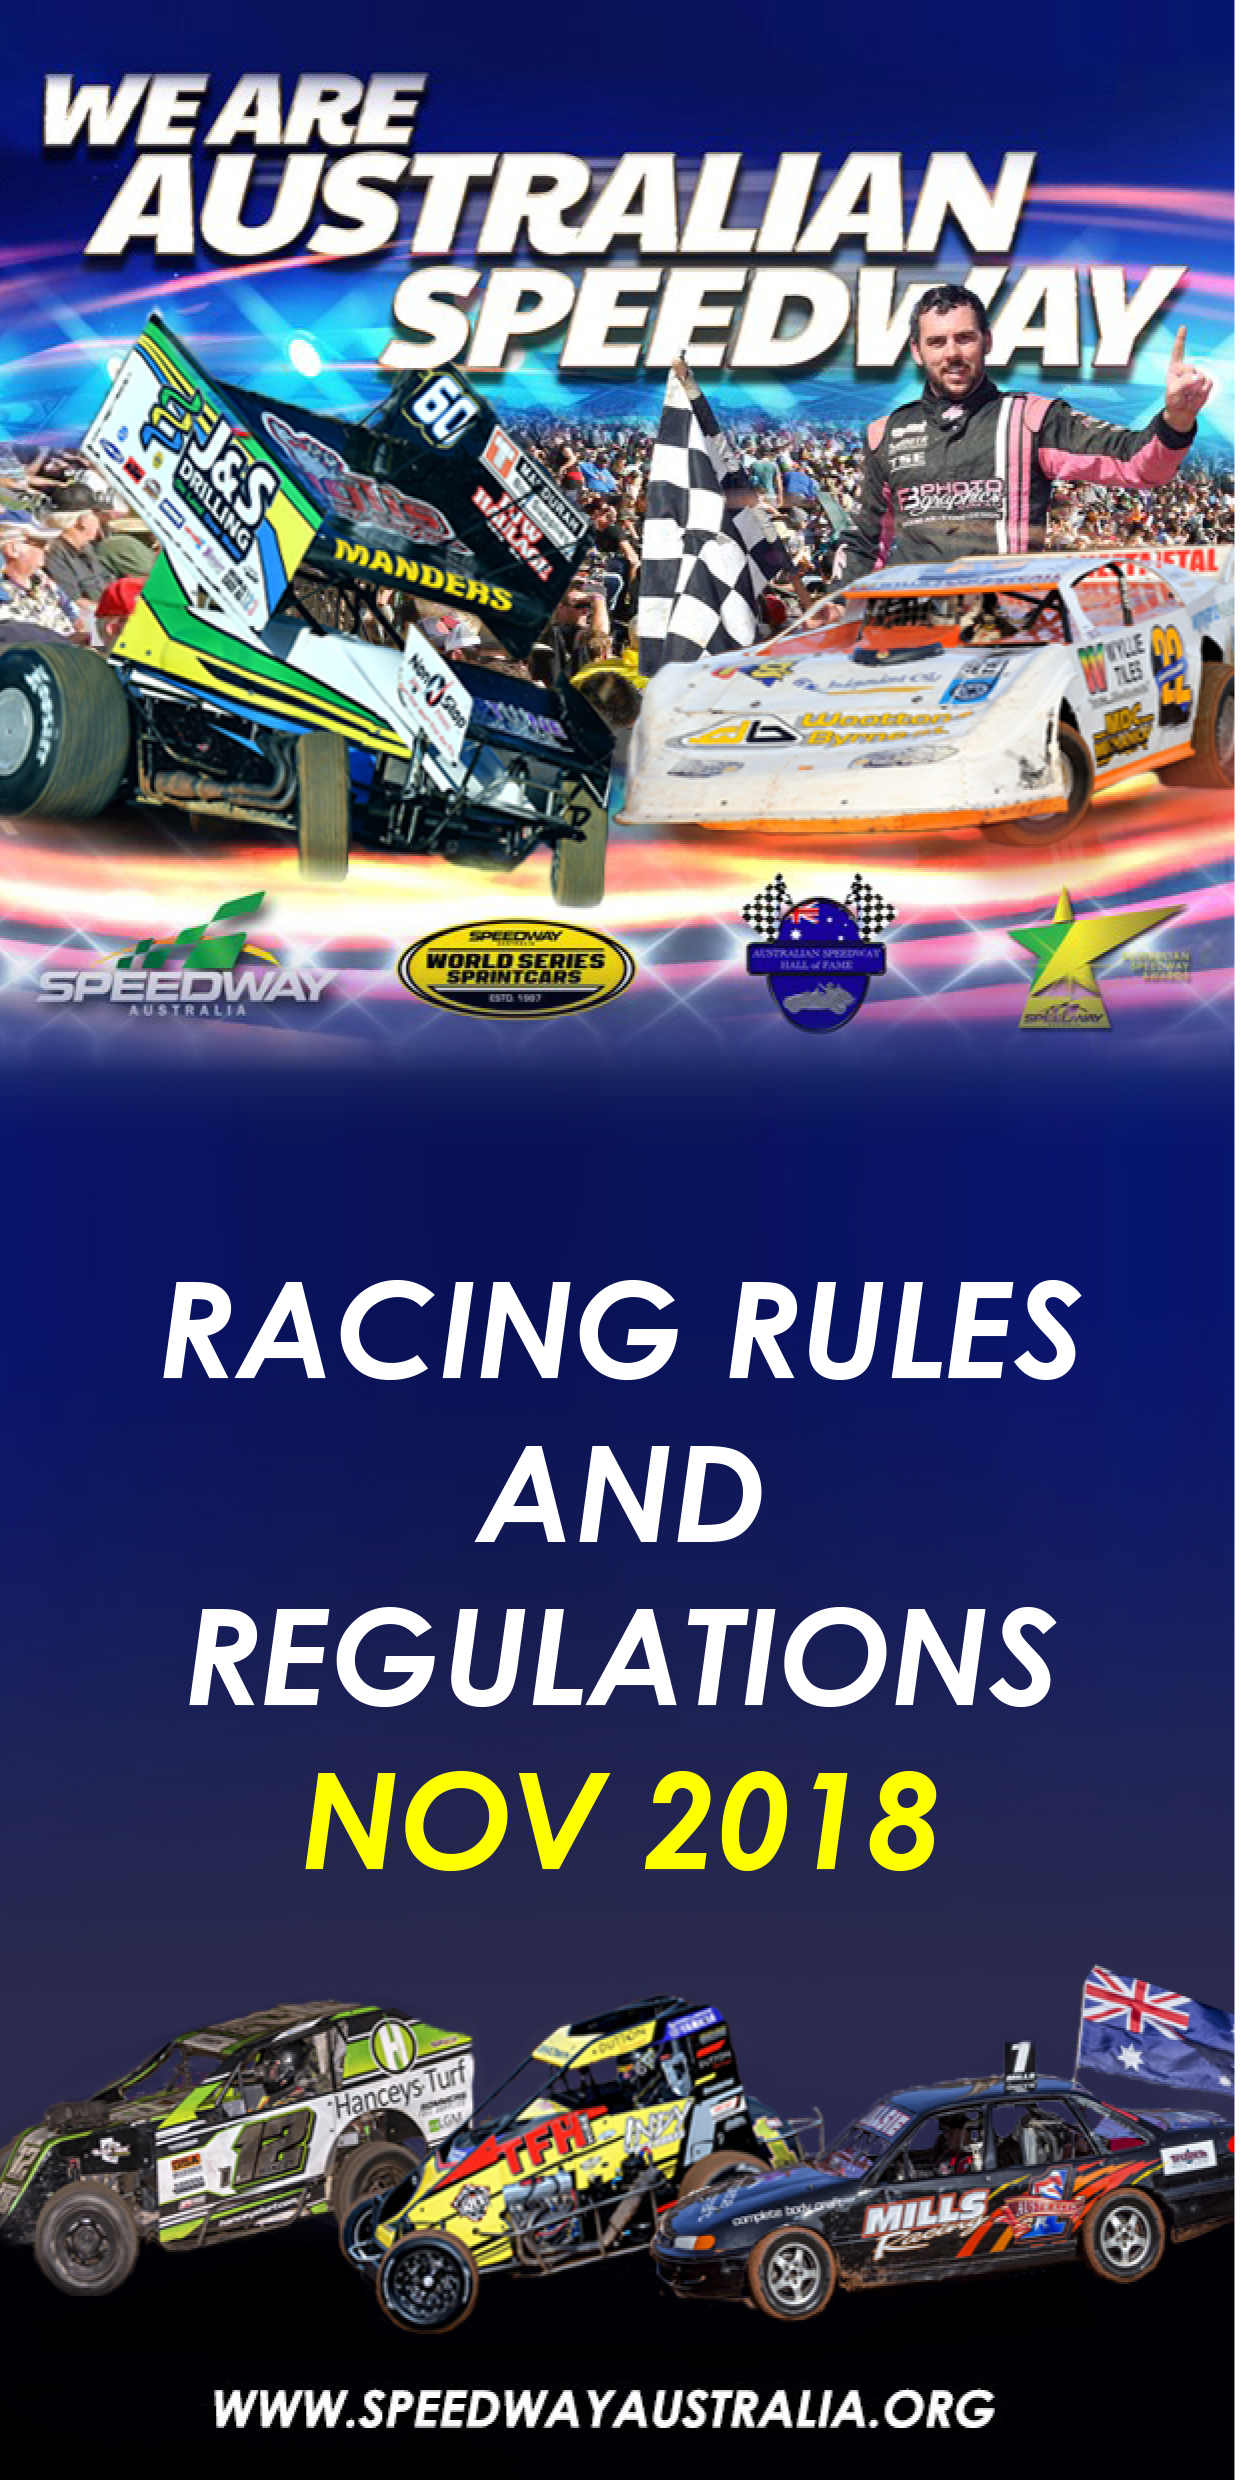 new-rulebook-out-now-speedway-australia